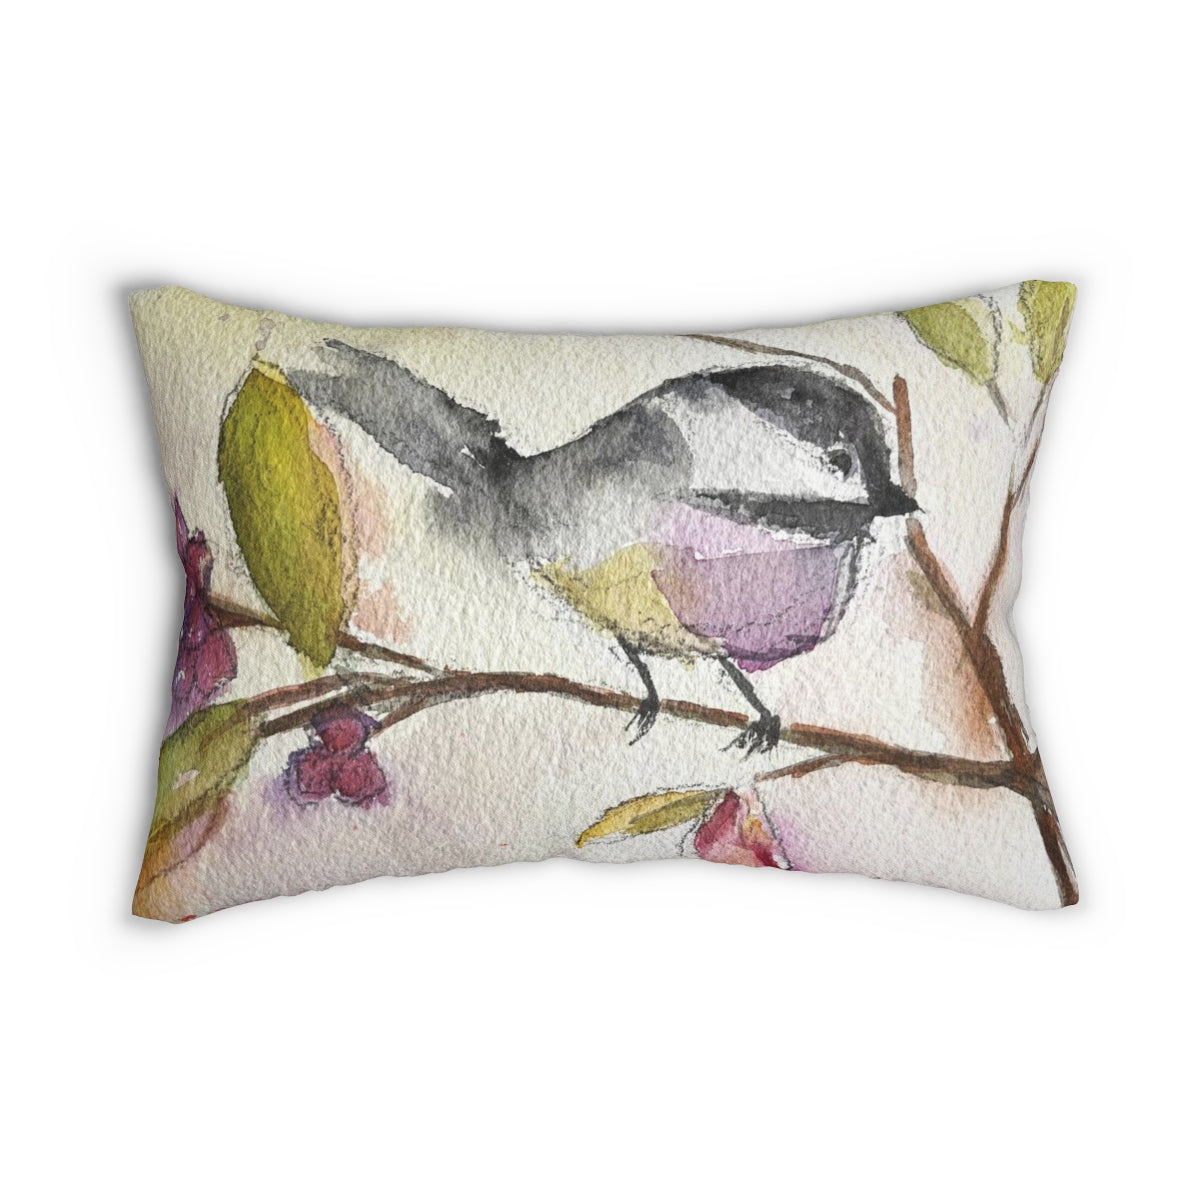 Chickadee Perched in a Berry Tree Lumbar Pillow